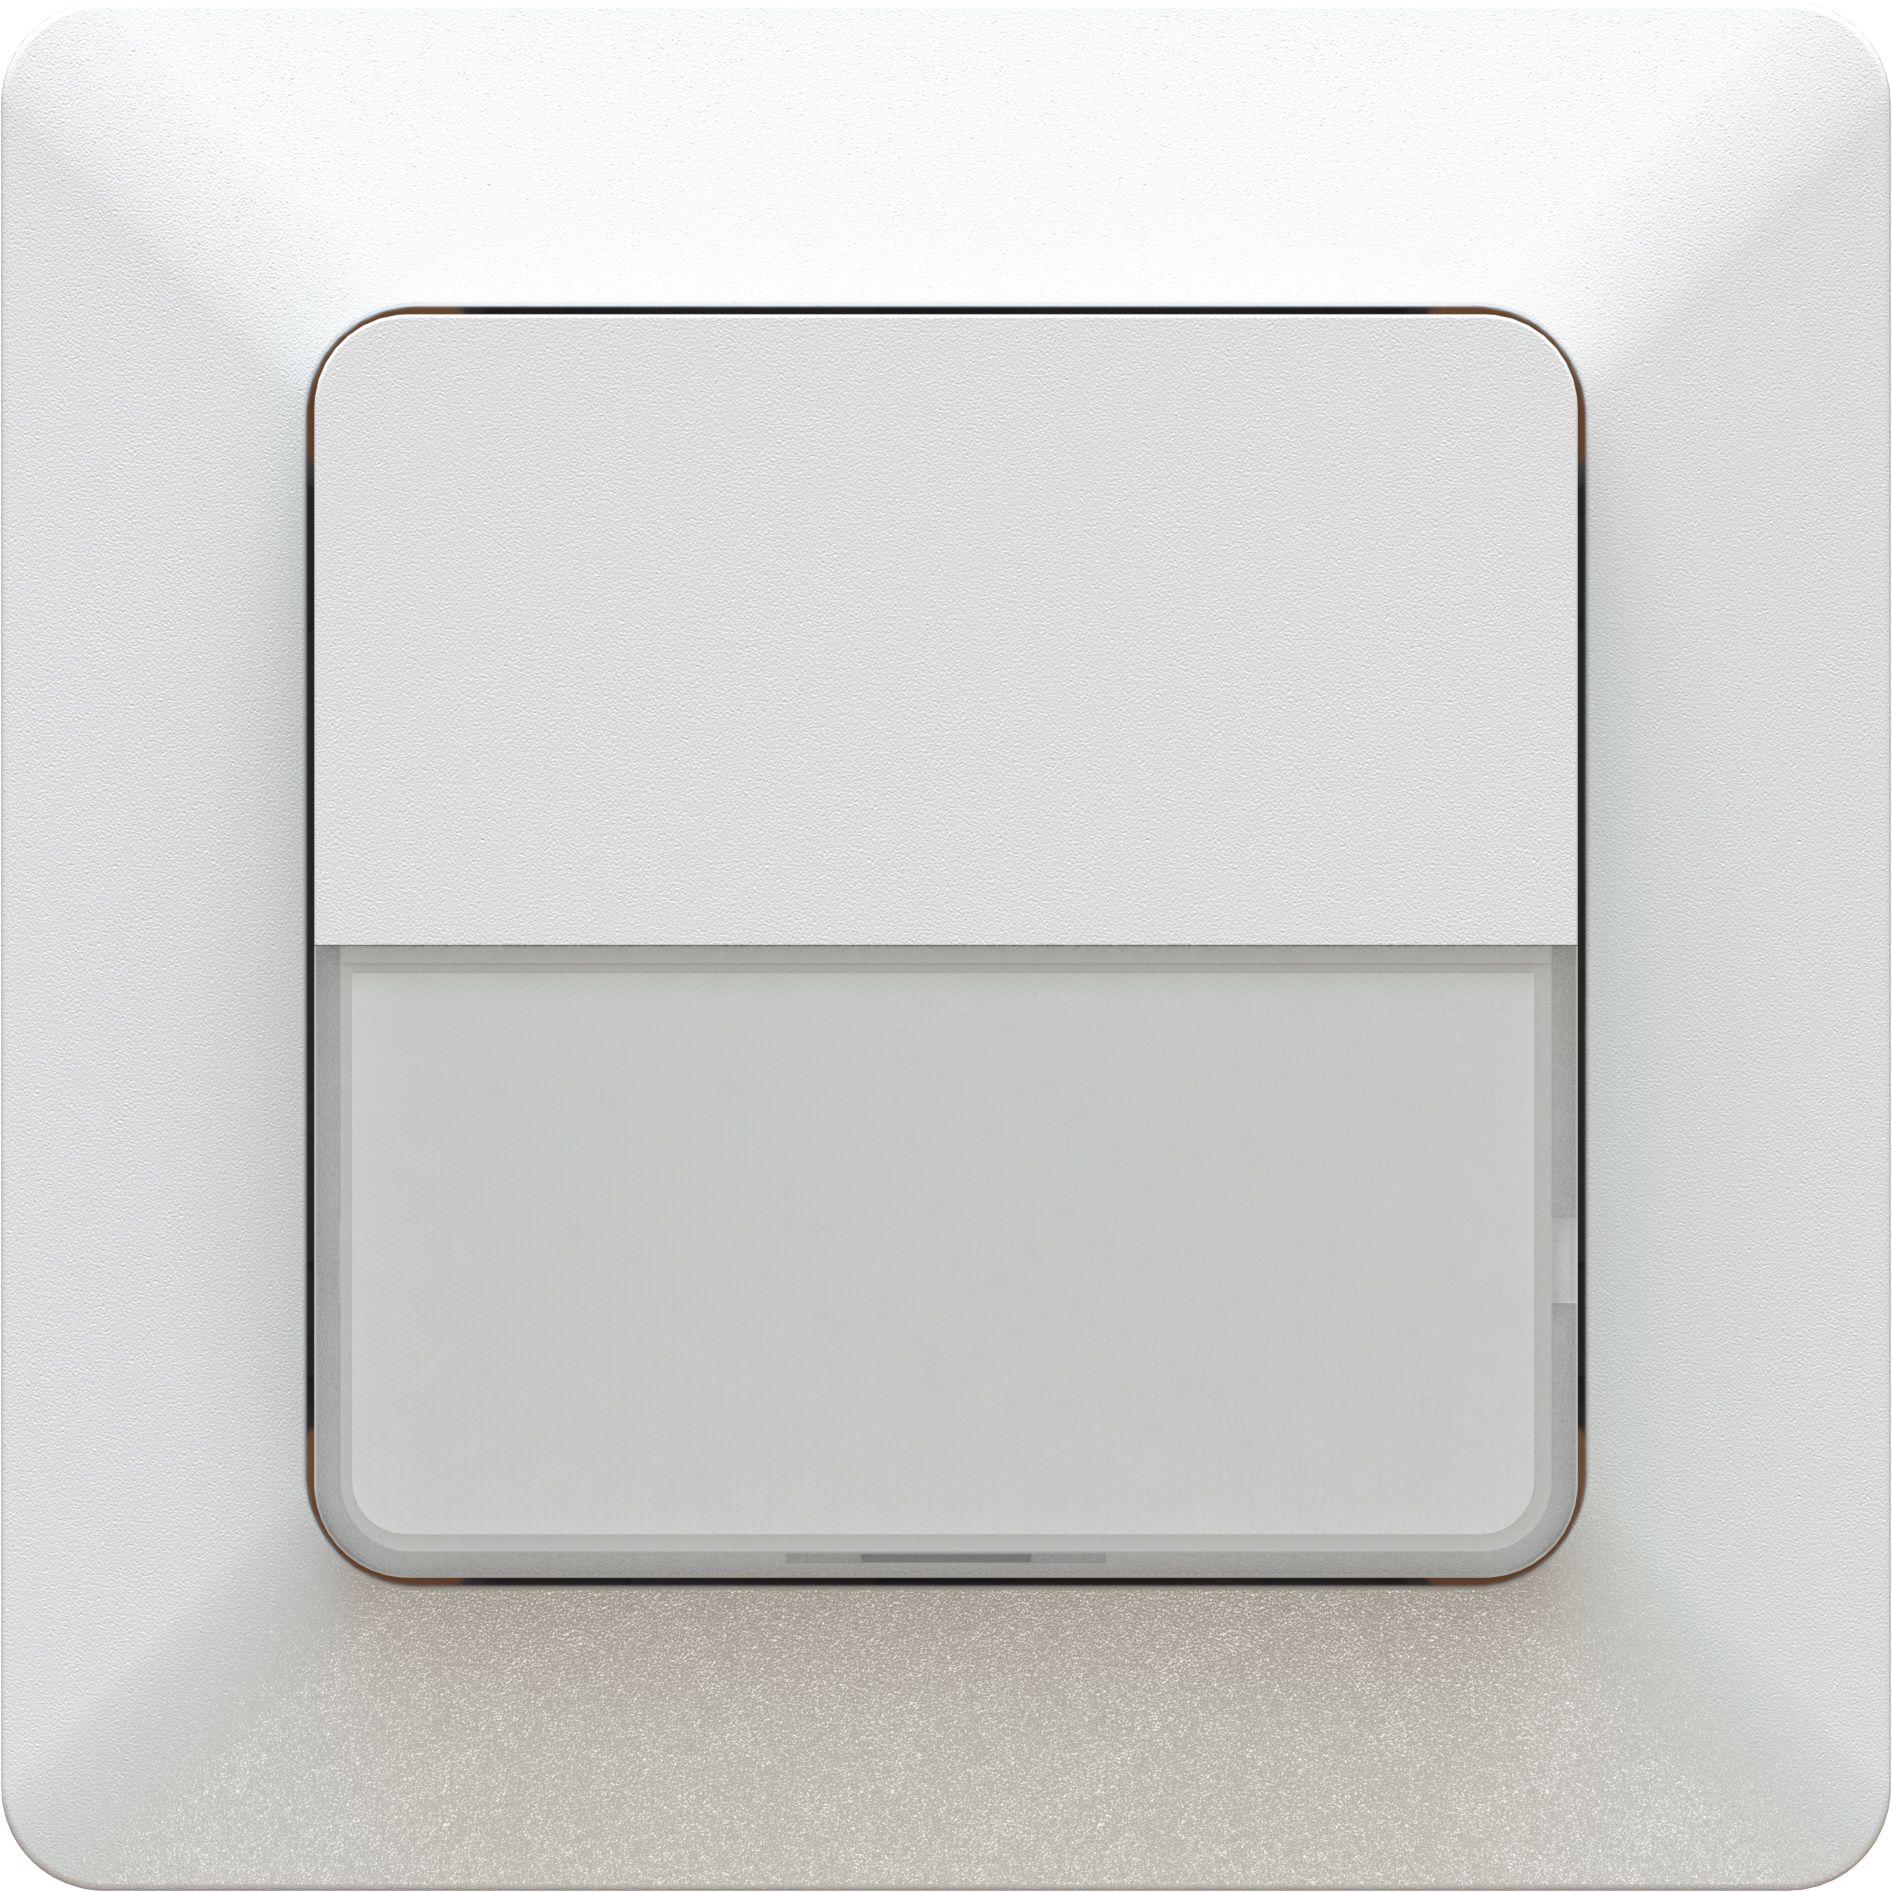 Flush-type wall switch sonnerie priamos white